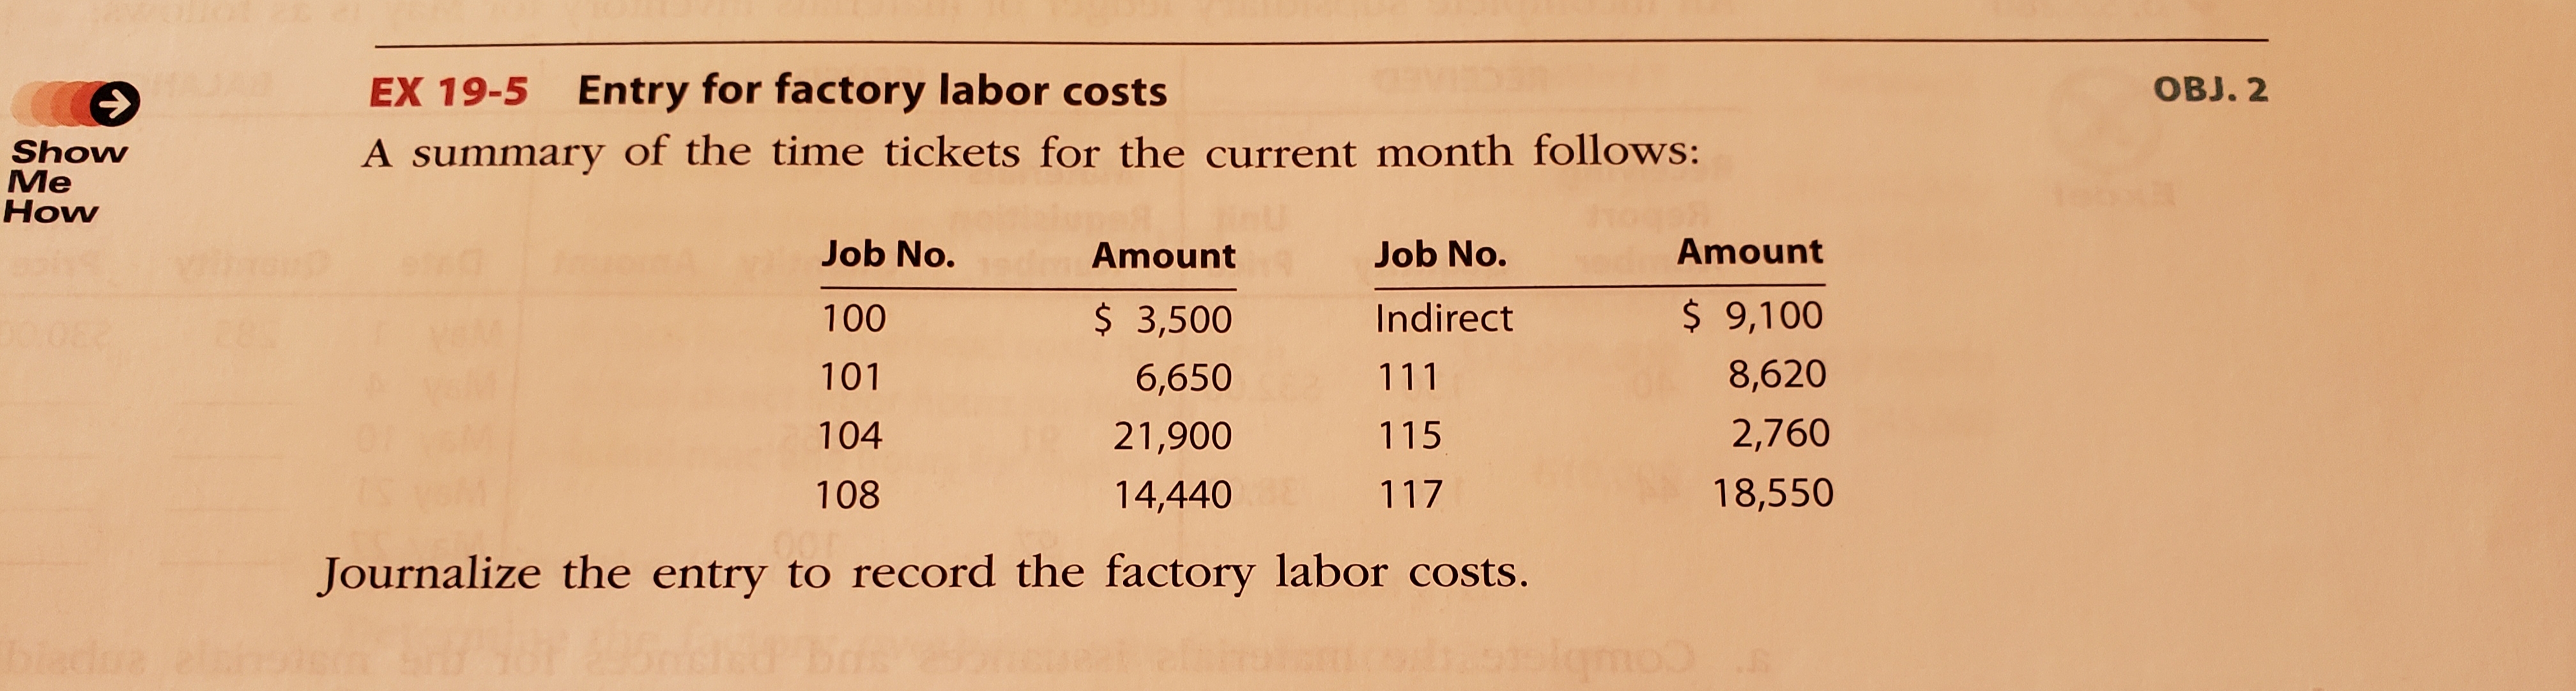 Э
EX 19-5 Entry for factory labor costs
OBJ. 2
A summary of the time tickets for the current month follows:
Show
Me
How
Job No.
Amount
Job No.
Amount
100
$ 3,500
Indirect
$ 9,100
101
6,650
111
8,620
104
21,900
115
2,760
108
14,440
117
18,550
Journalize the entry to record the factory labor costs.
blado
lqmoo
